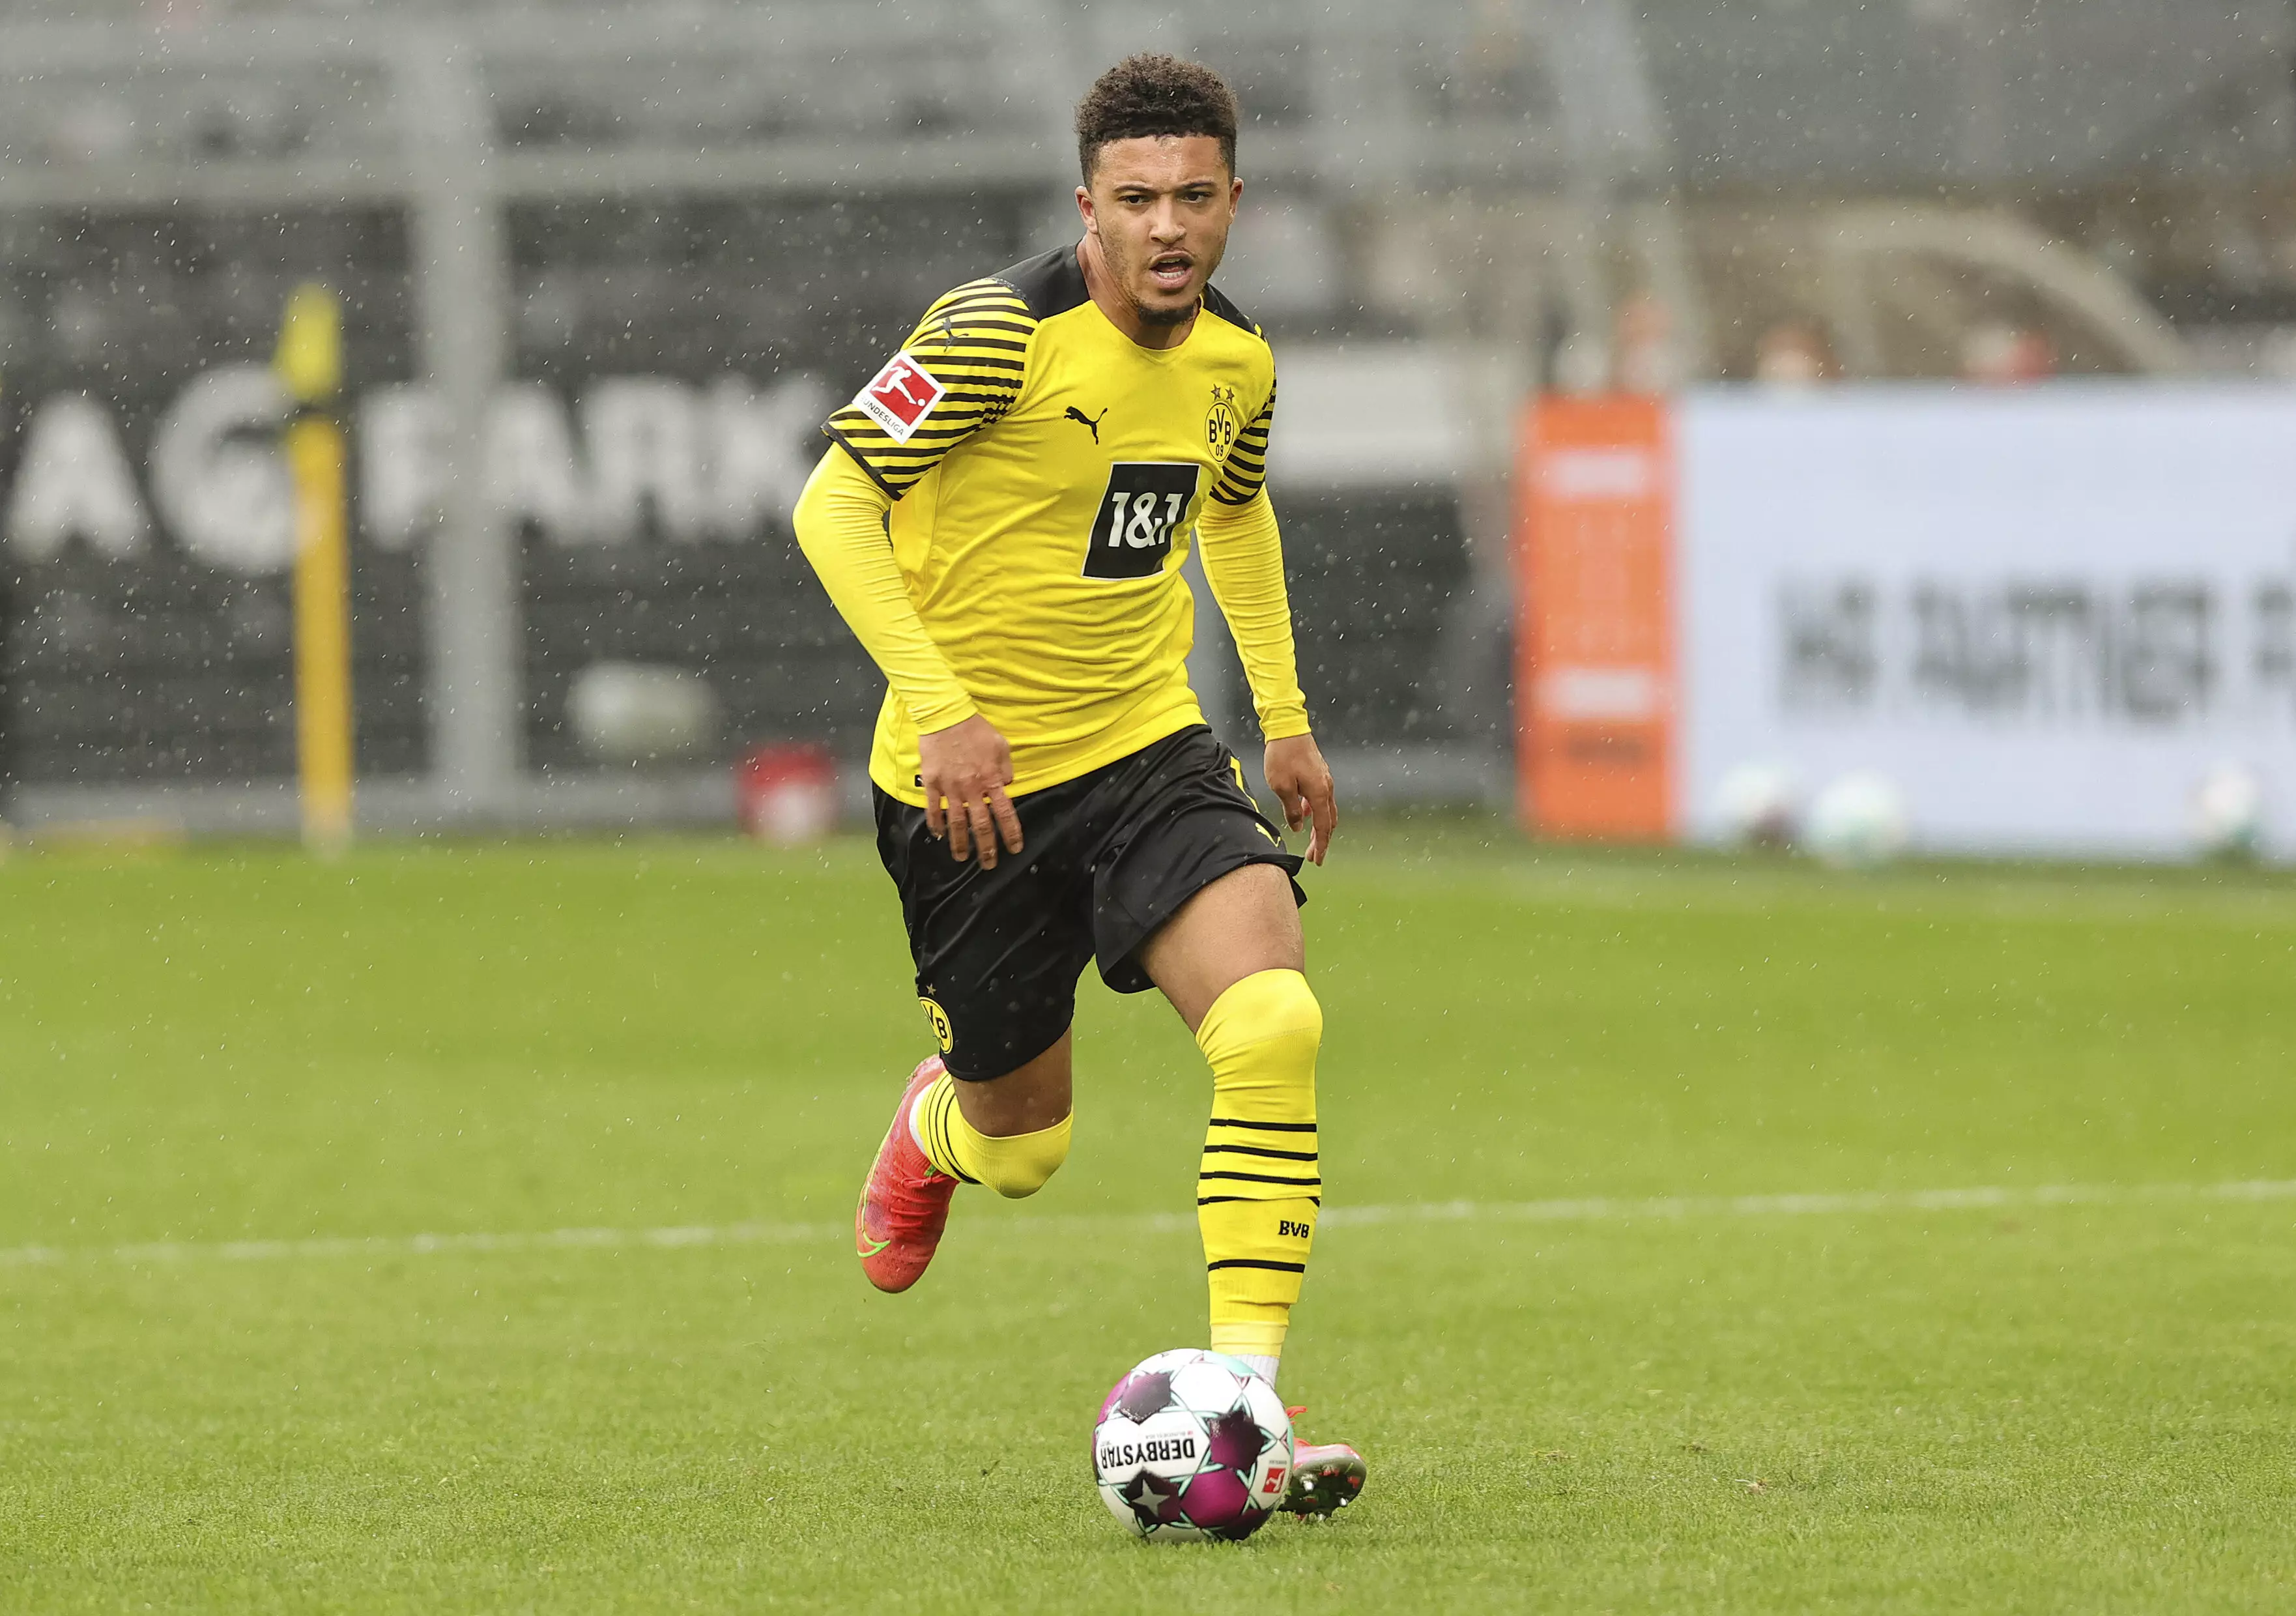 Sancho is expected to make the move to United this summer. Image: PA Images